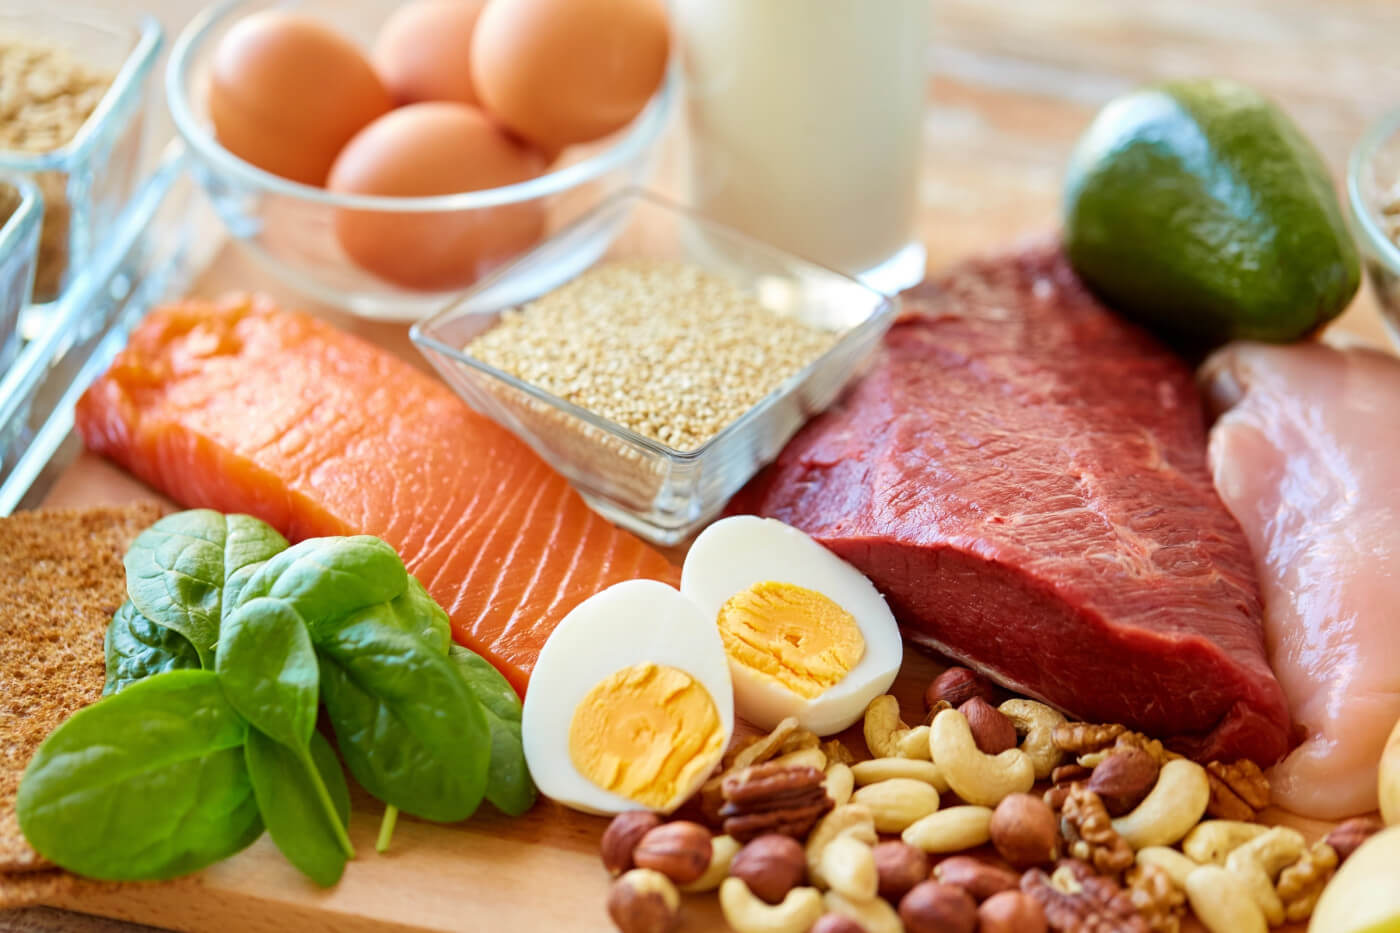 A plate full of multiple sources of protein which is very important to consider during bariatric meal planning